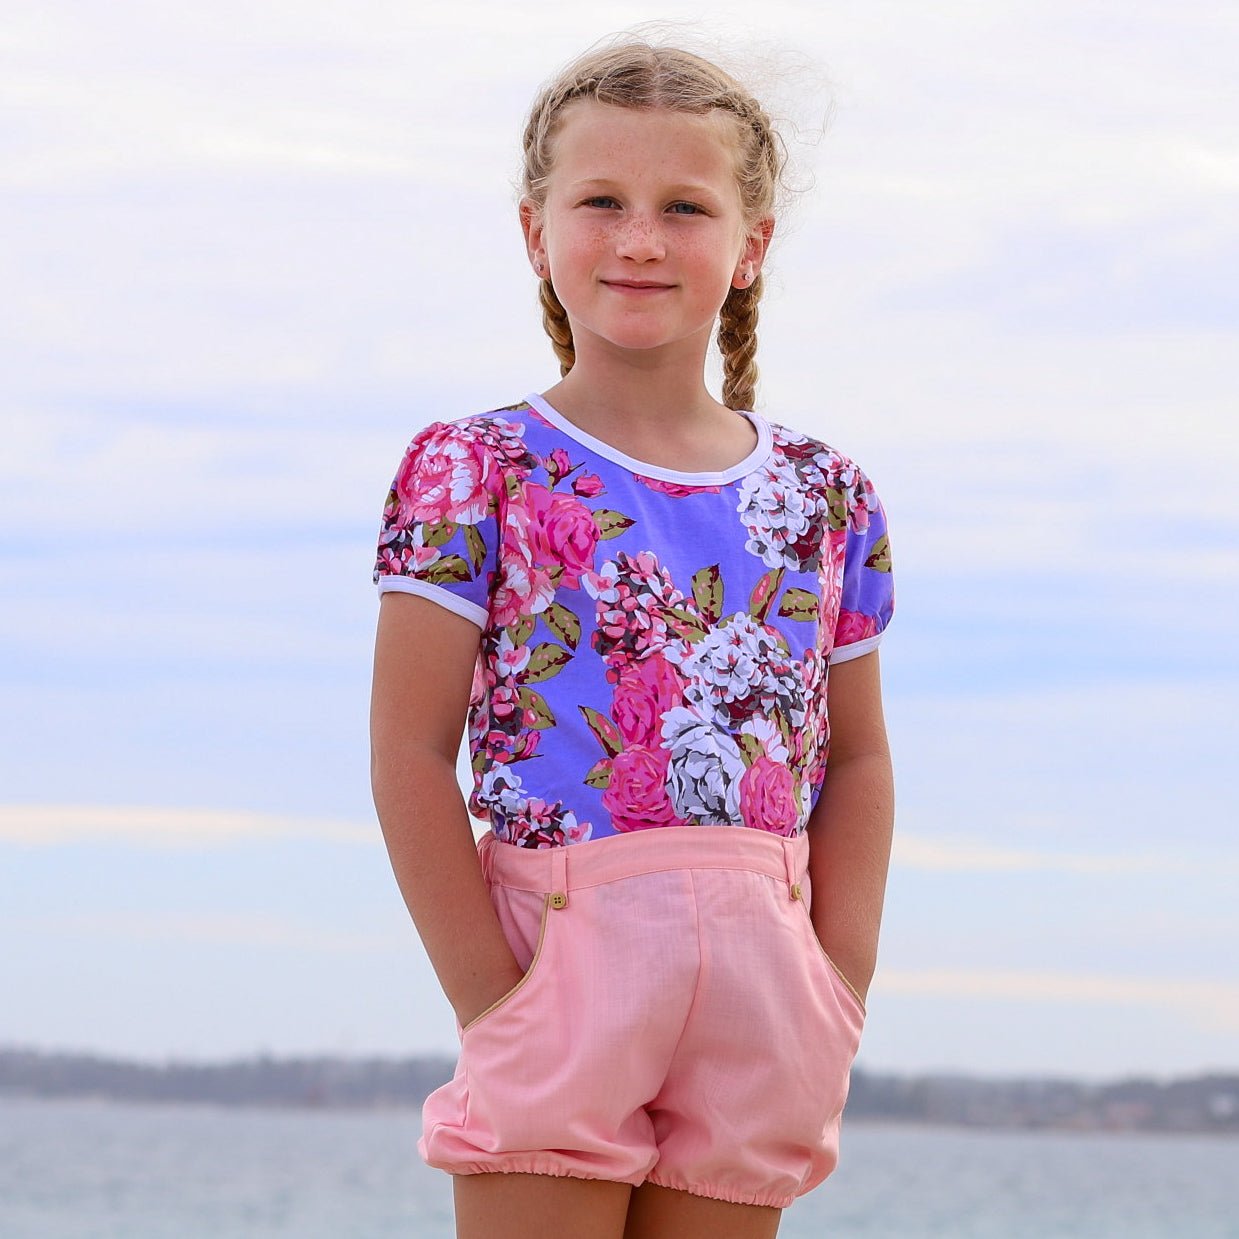 SOFT BERRY PINK SHORTS - Toots Kids